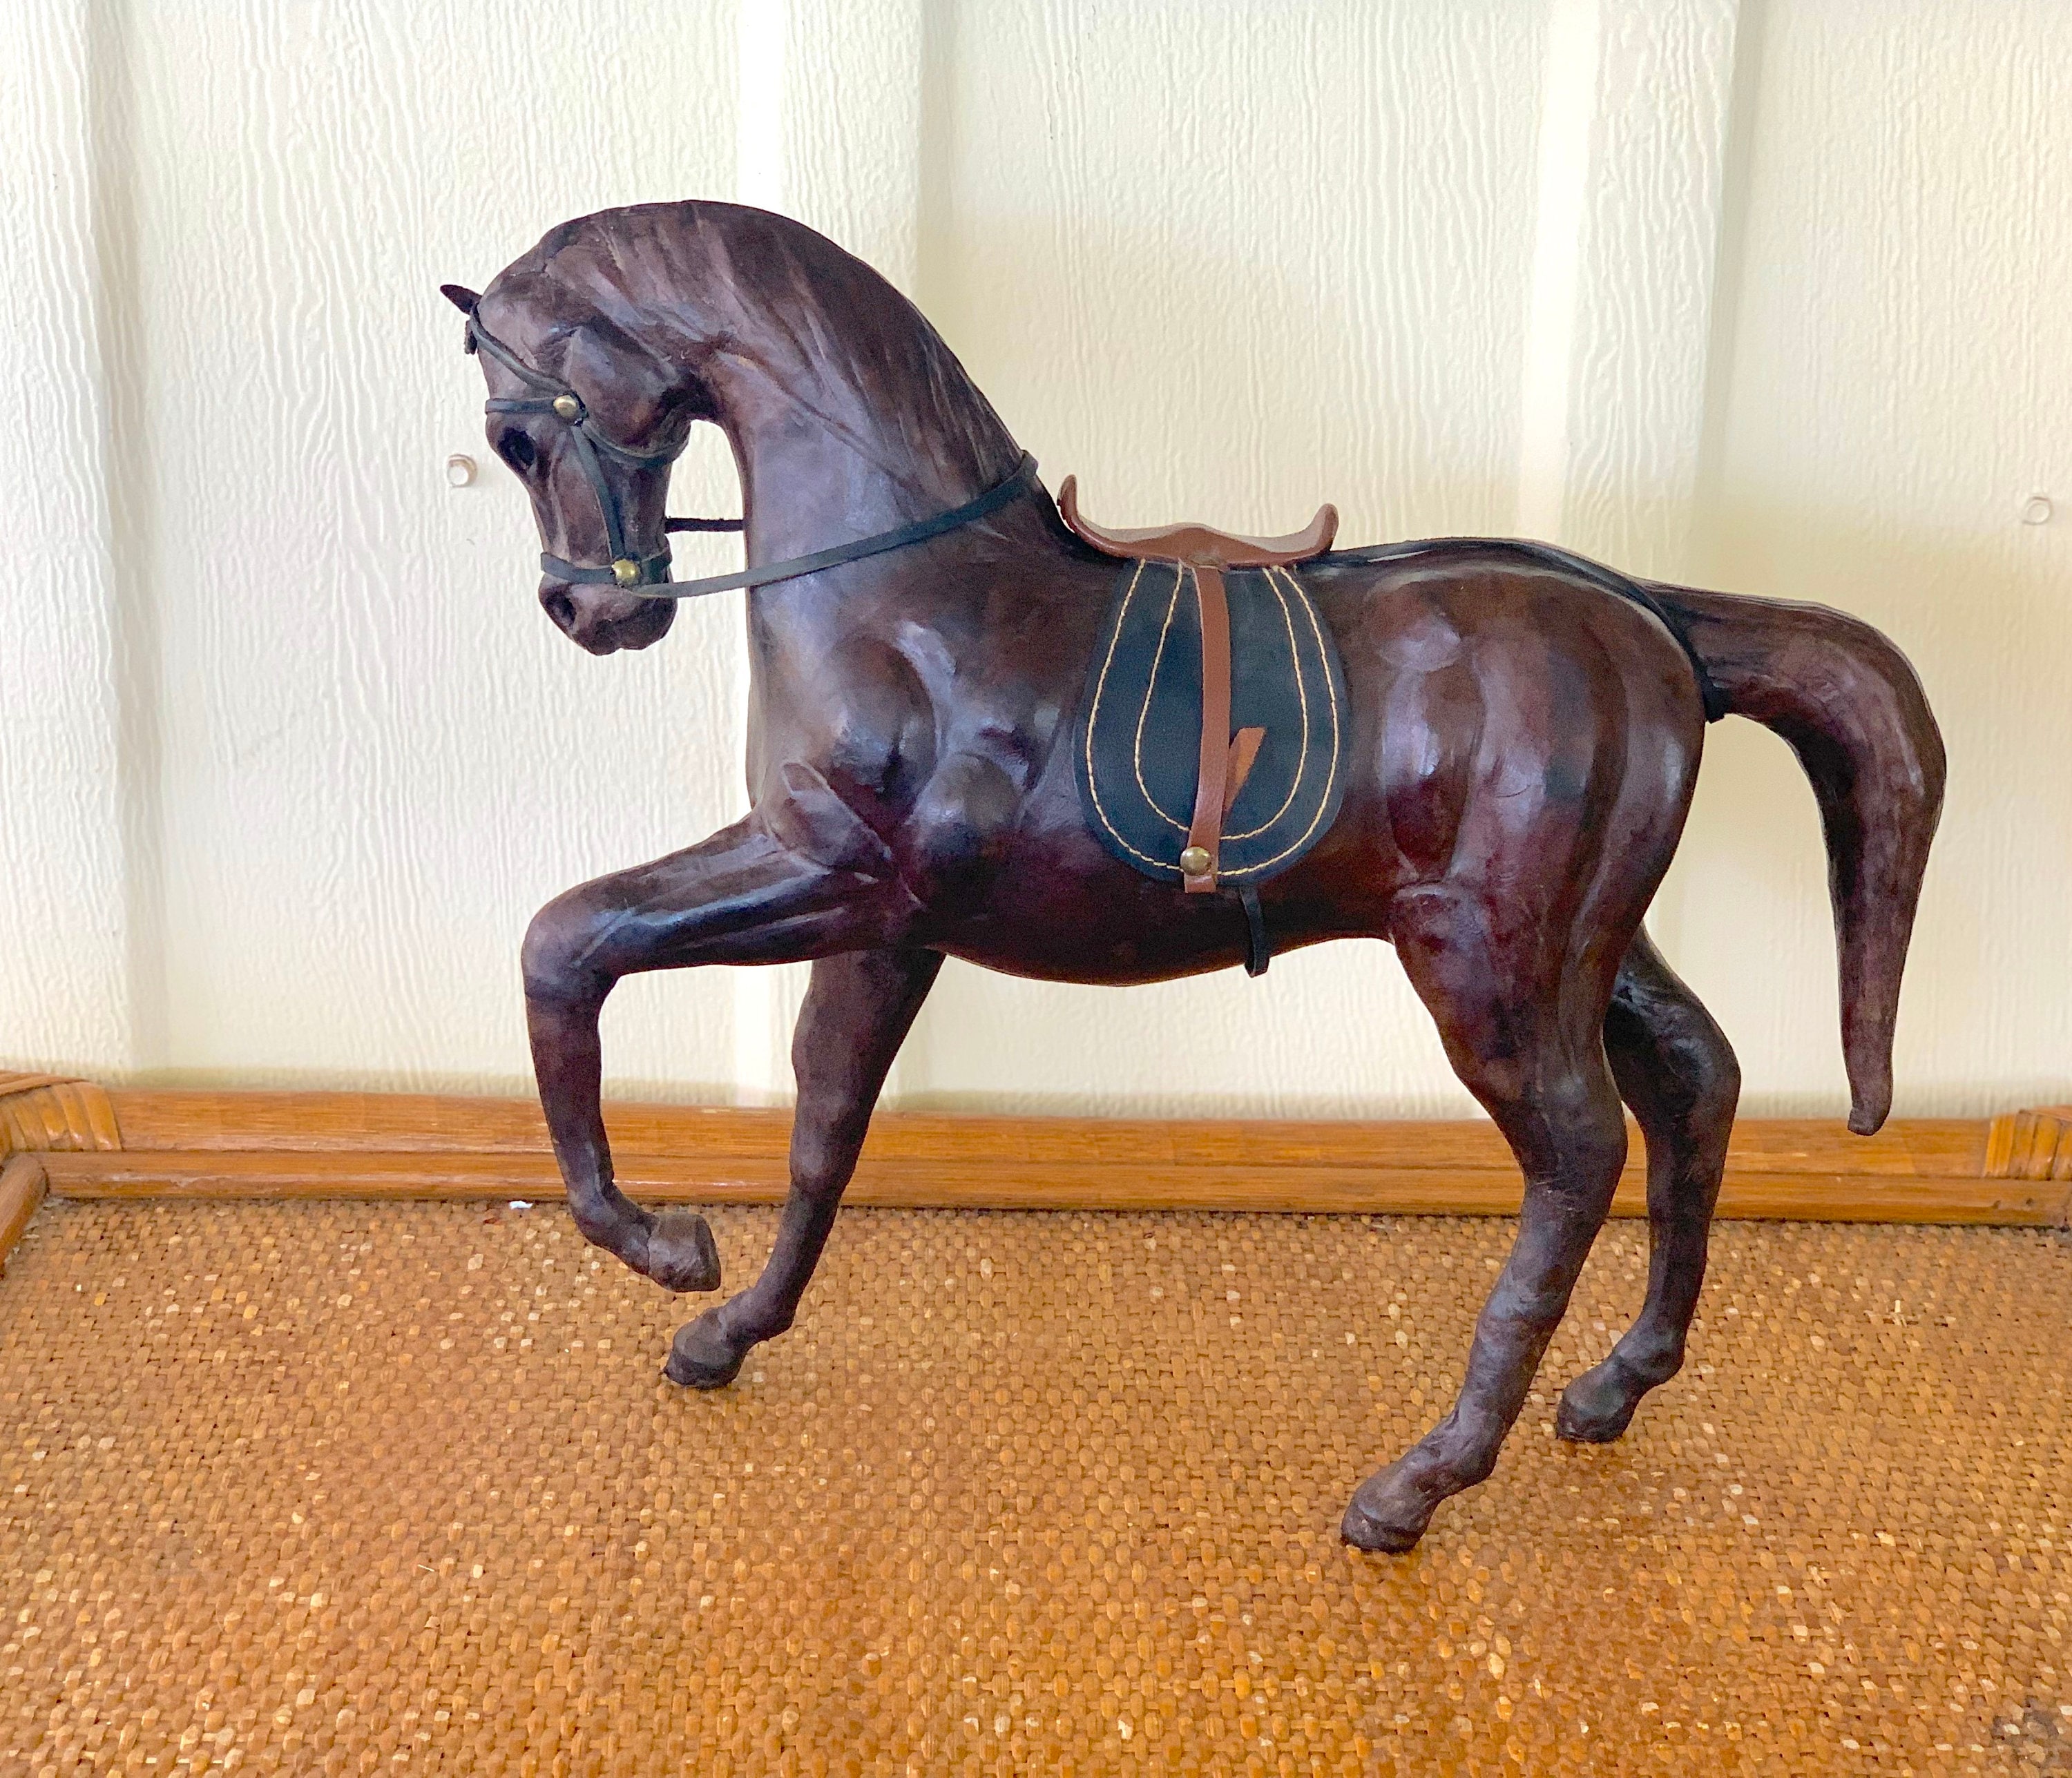 Personalized Horse Hair Figure - Leather and Horse Hair Totem - Create a  mini statue of your own special horse